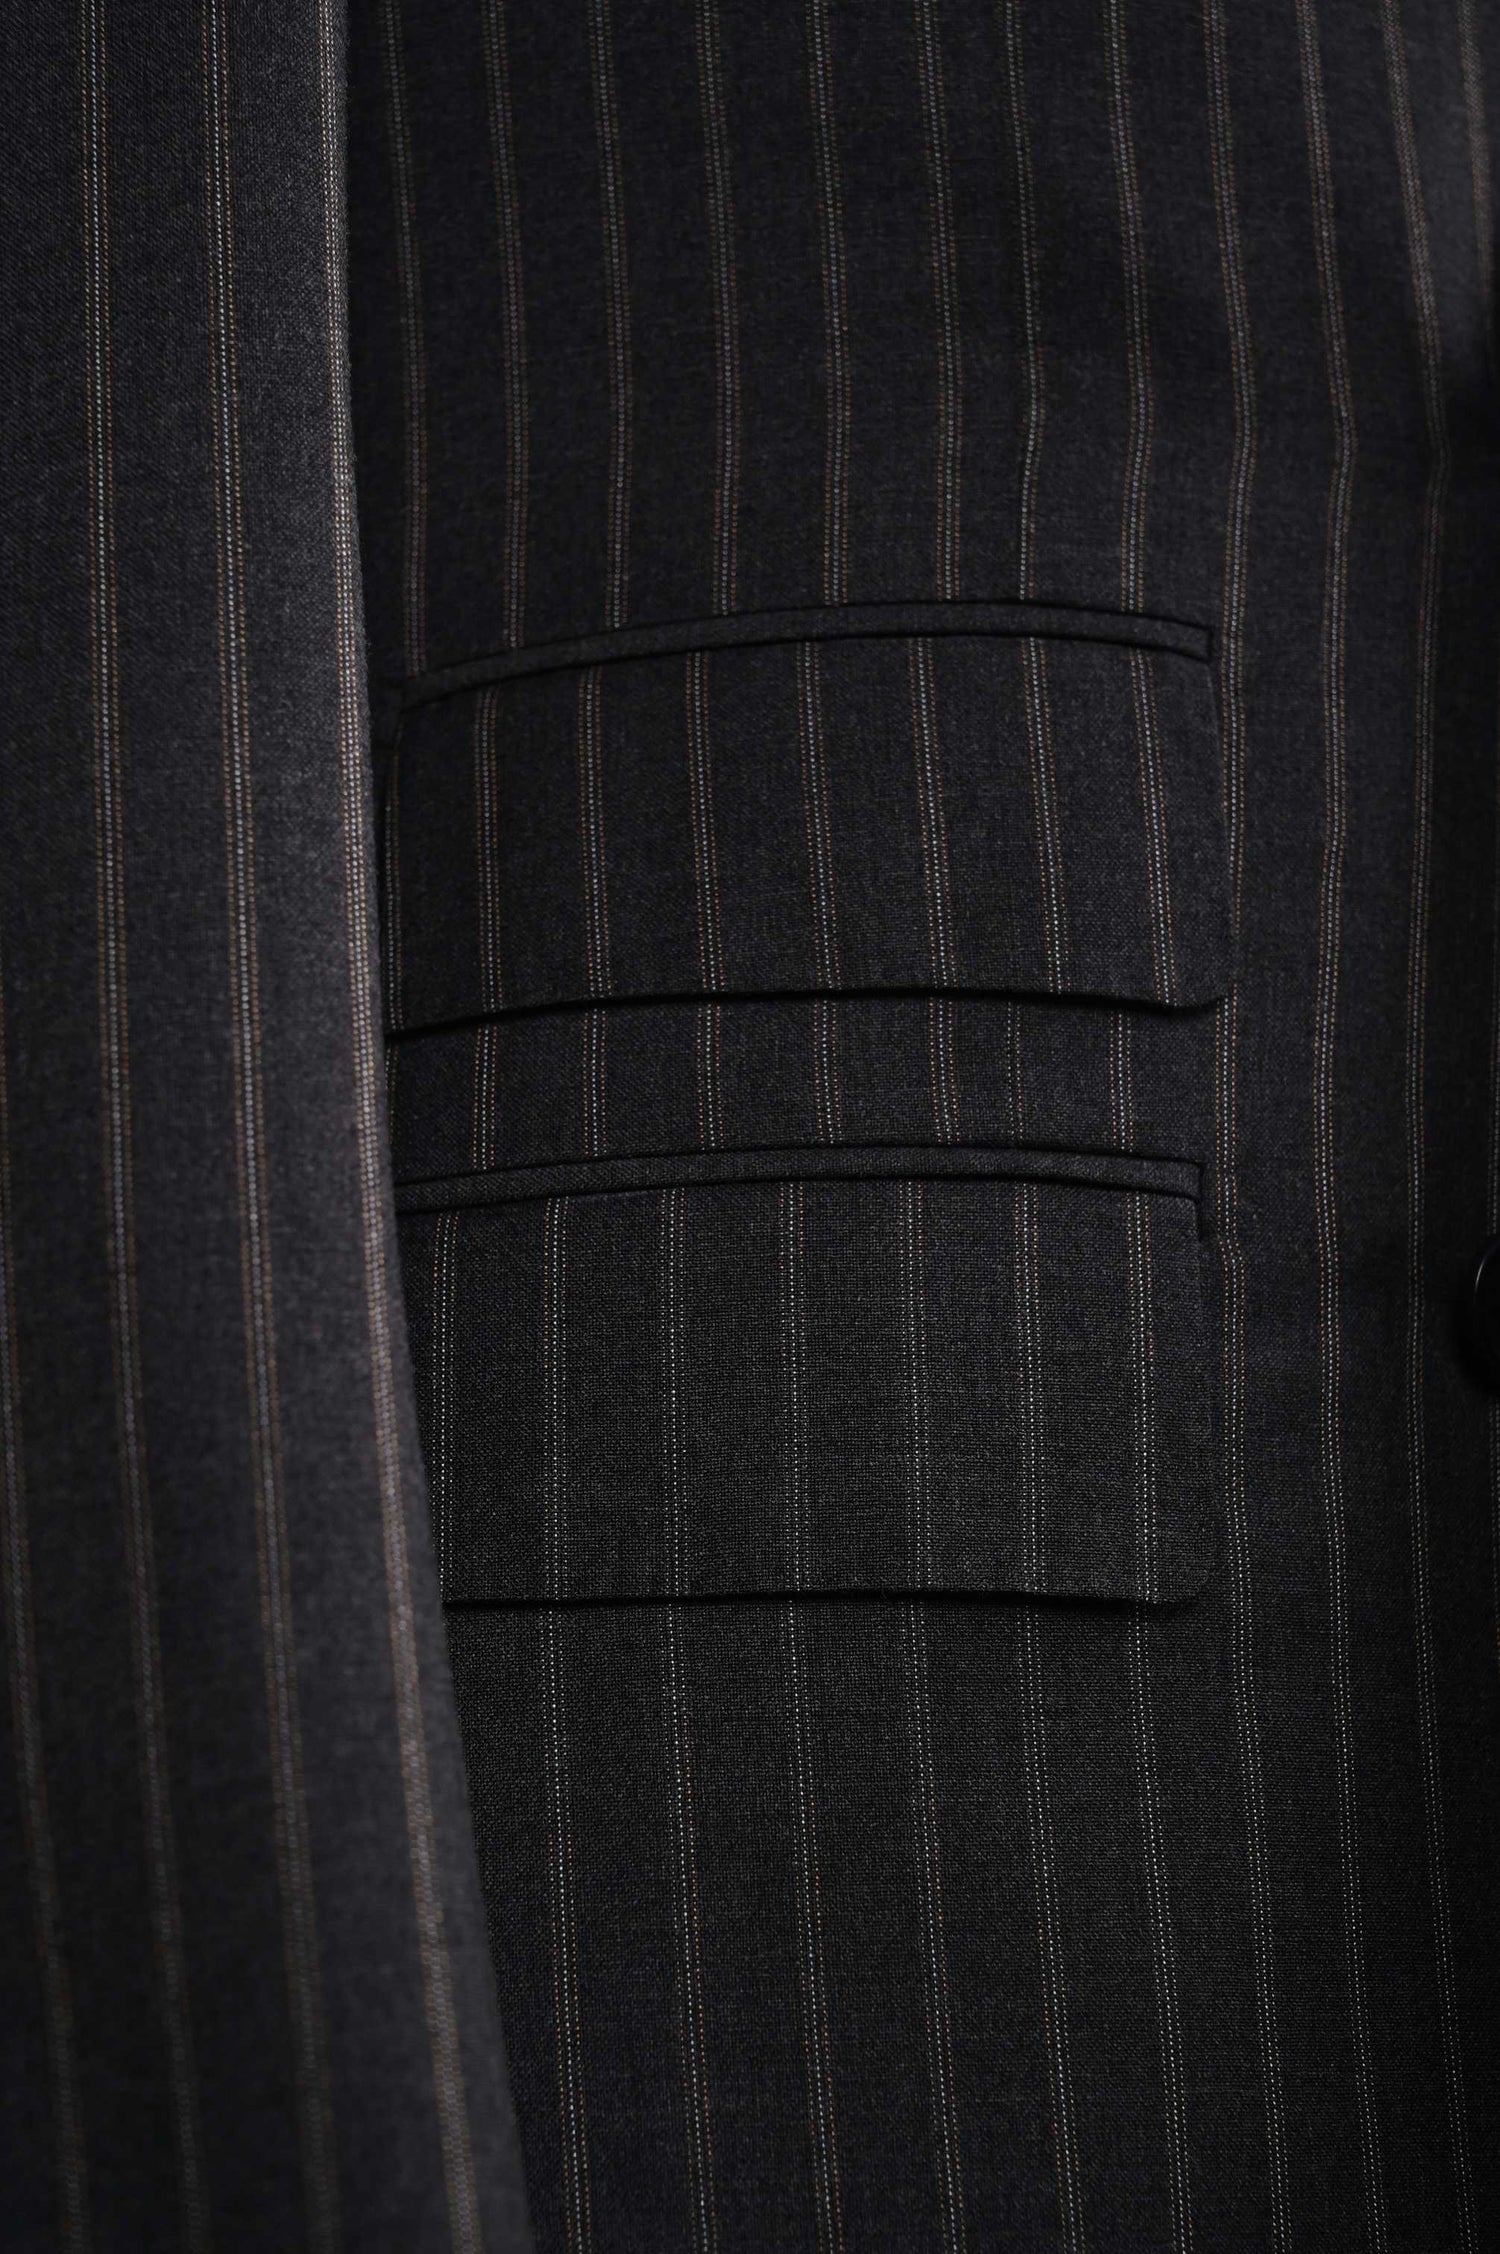 Canvassed Suit – Y&O-Bespoke